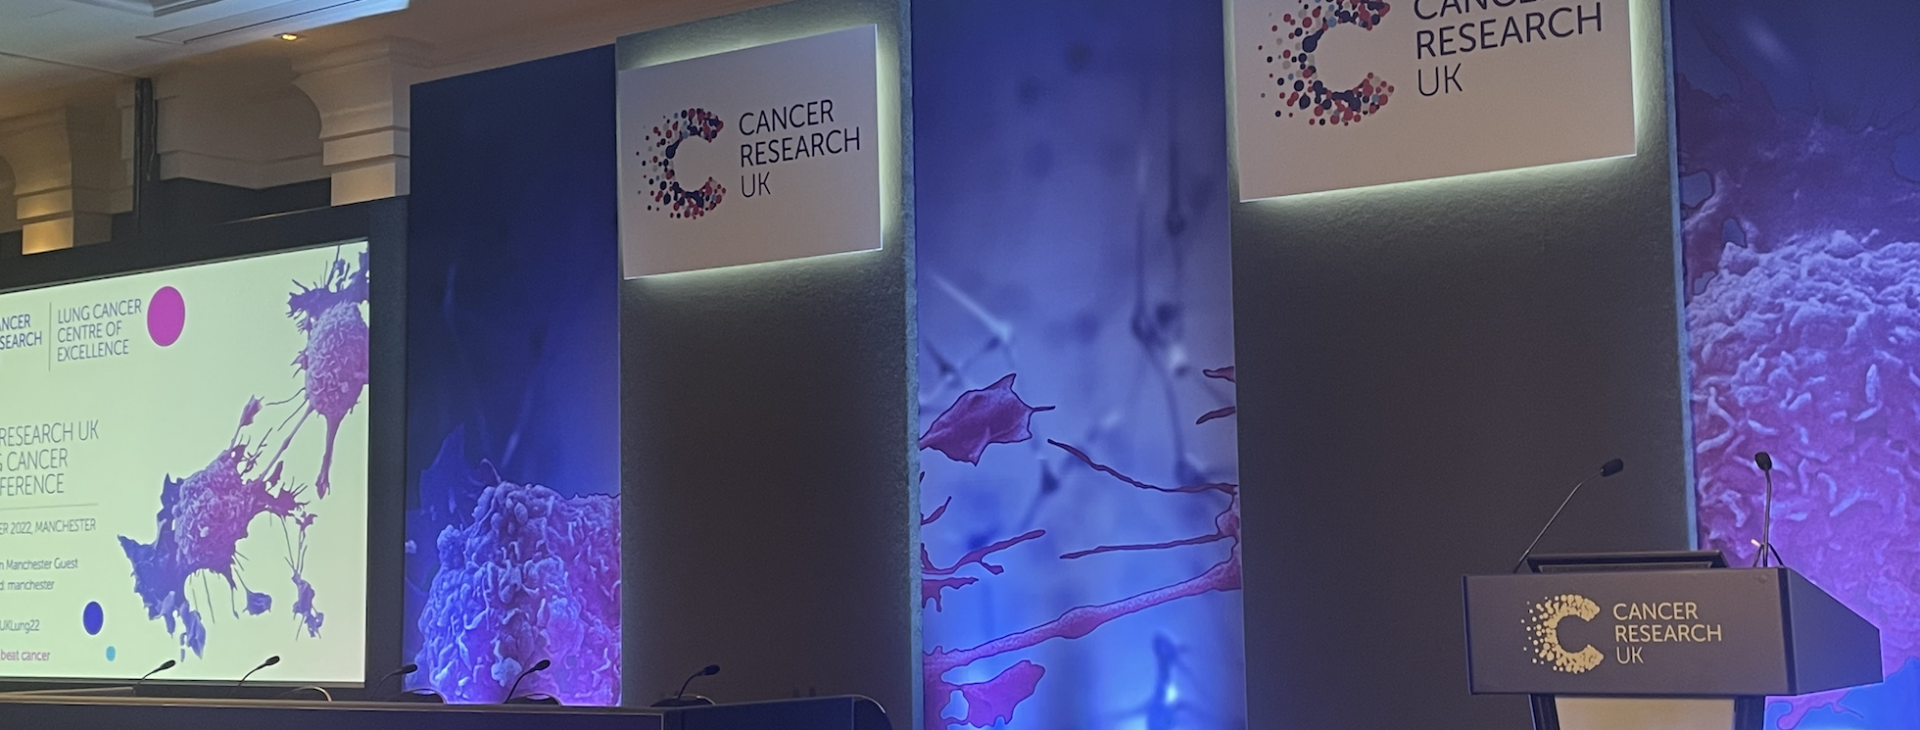 Manchester Cancer Research Centre | CRUK Lung Cancer Conference 2022